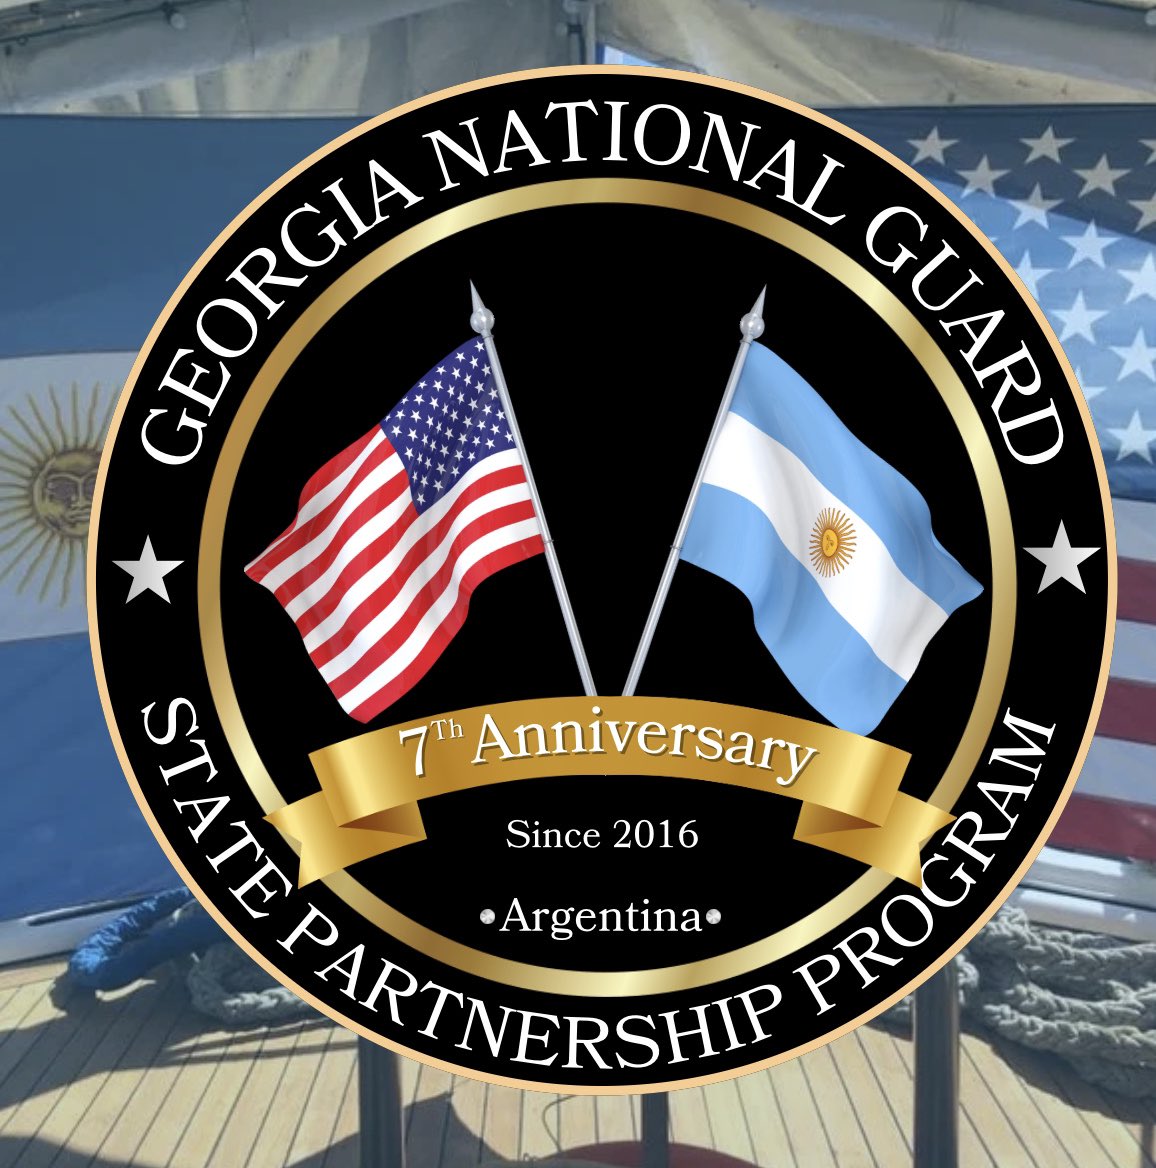 🇦🇷🇺🇸 Today we embark on our seventh year partnership with the Republic of Argentina 🇦🇷🇺🇸#StatePartnershipProgram #SharedPurpose #SharedValues #SharedVictory facebook.com/10004865444152…